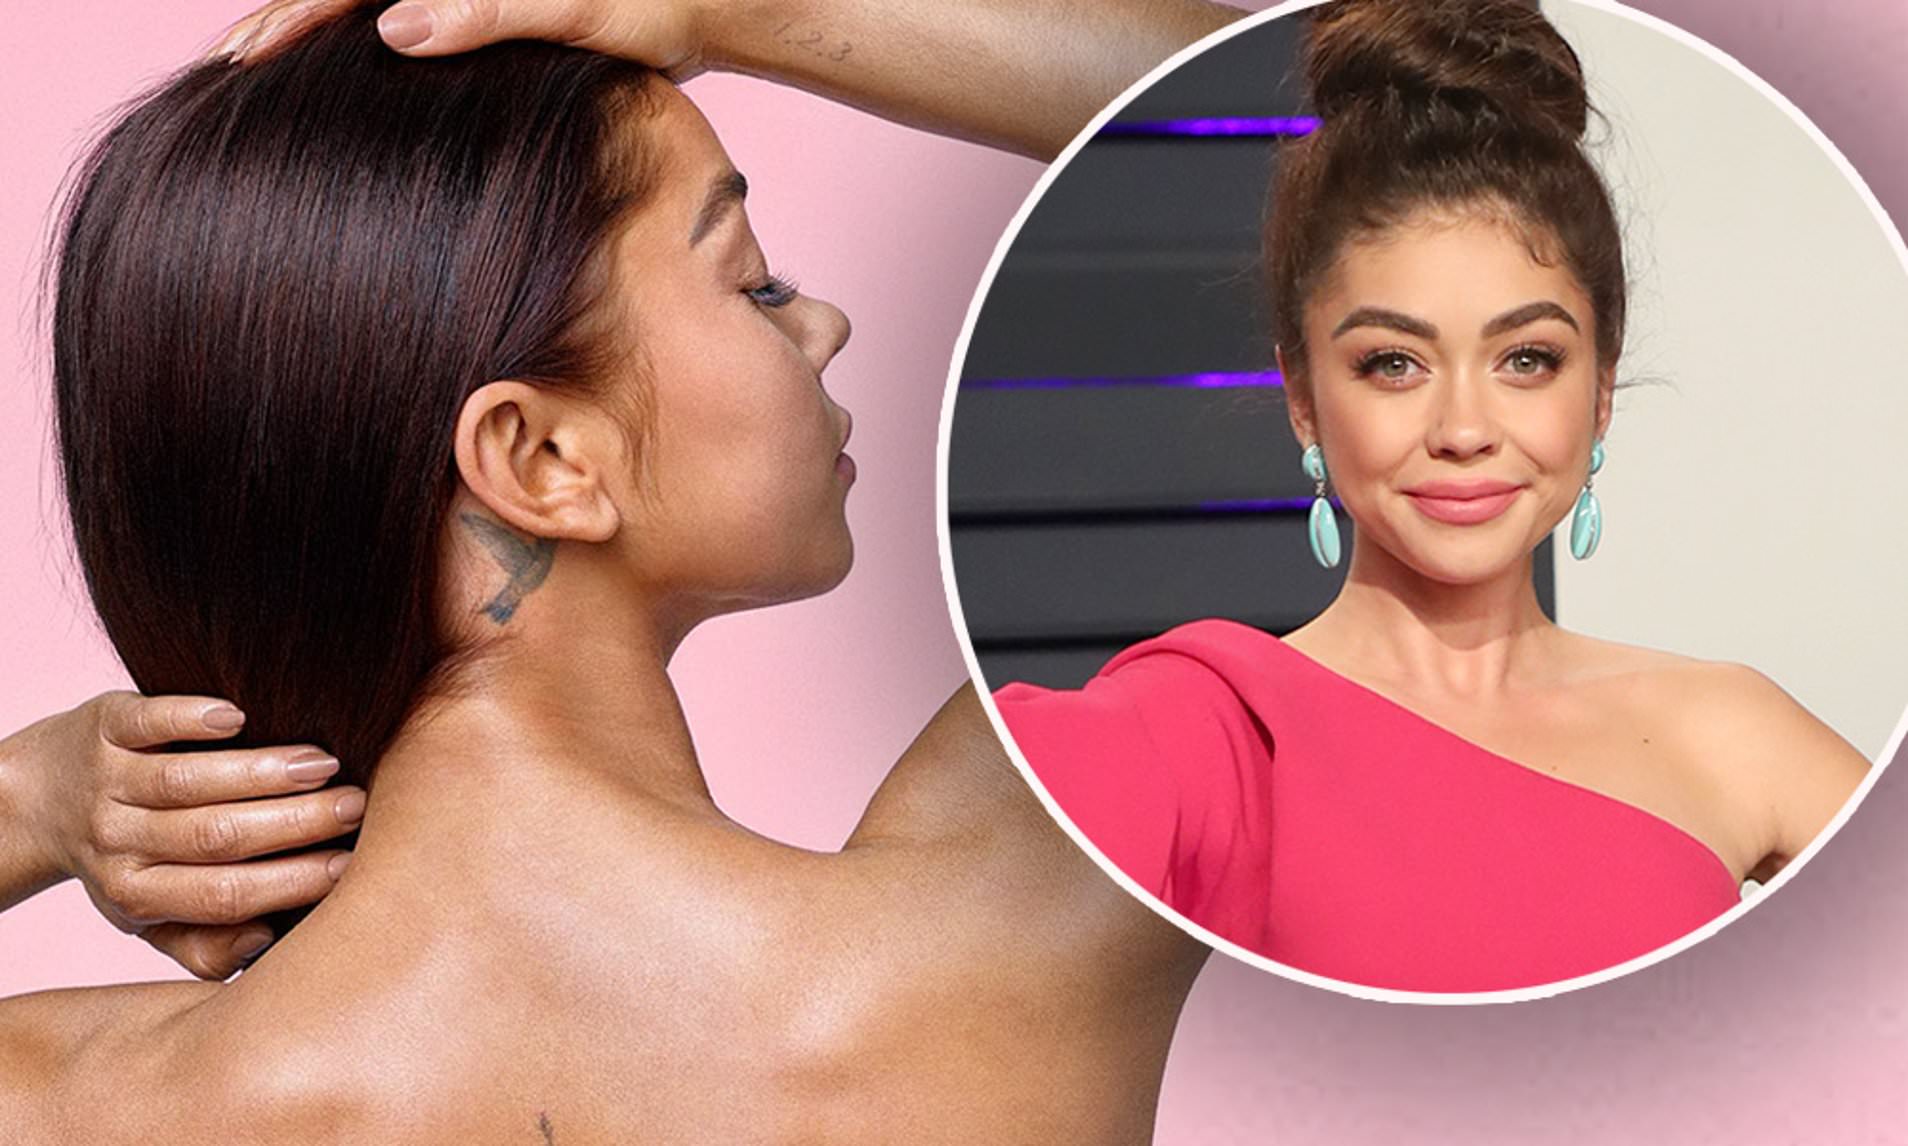 candice archie recommends has sarah hyland ever posed nude pic